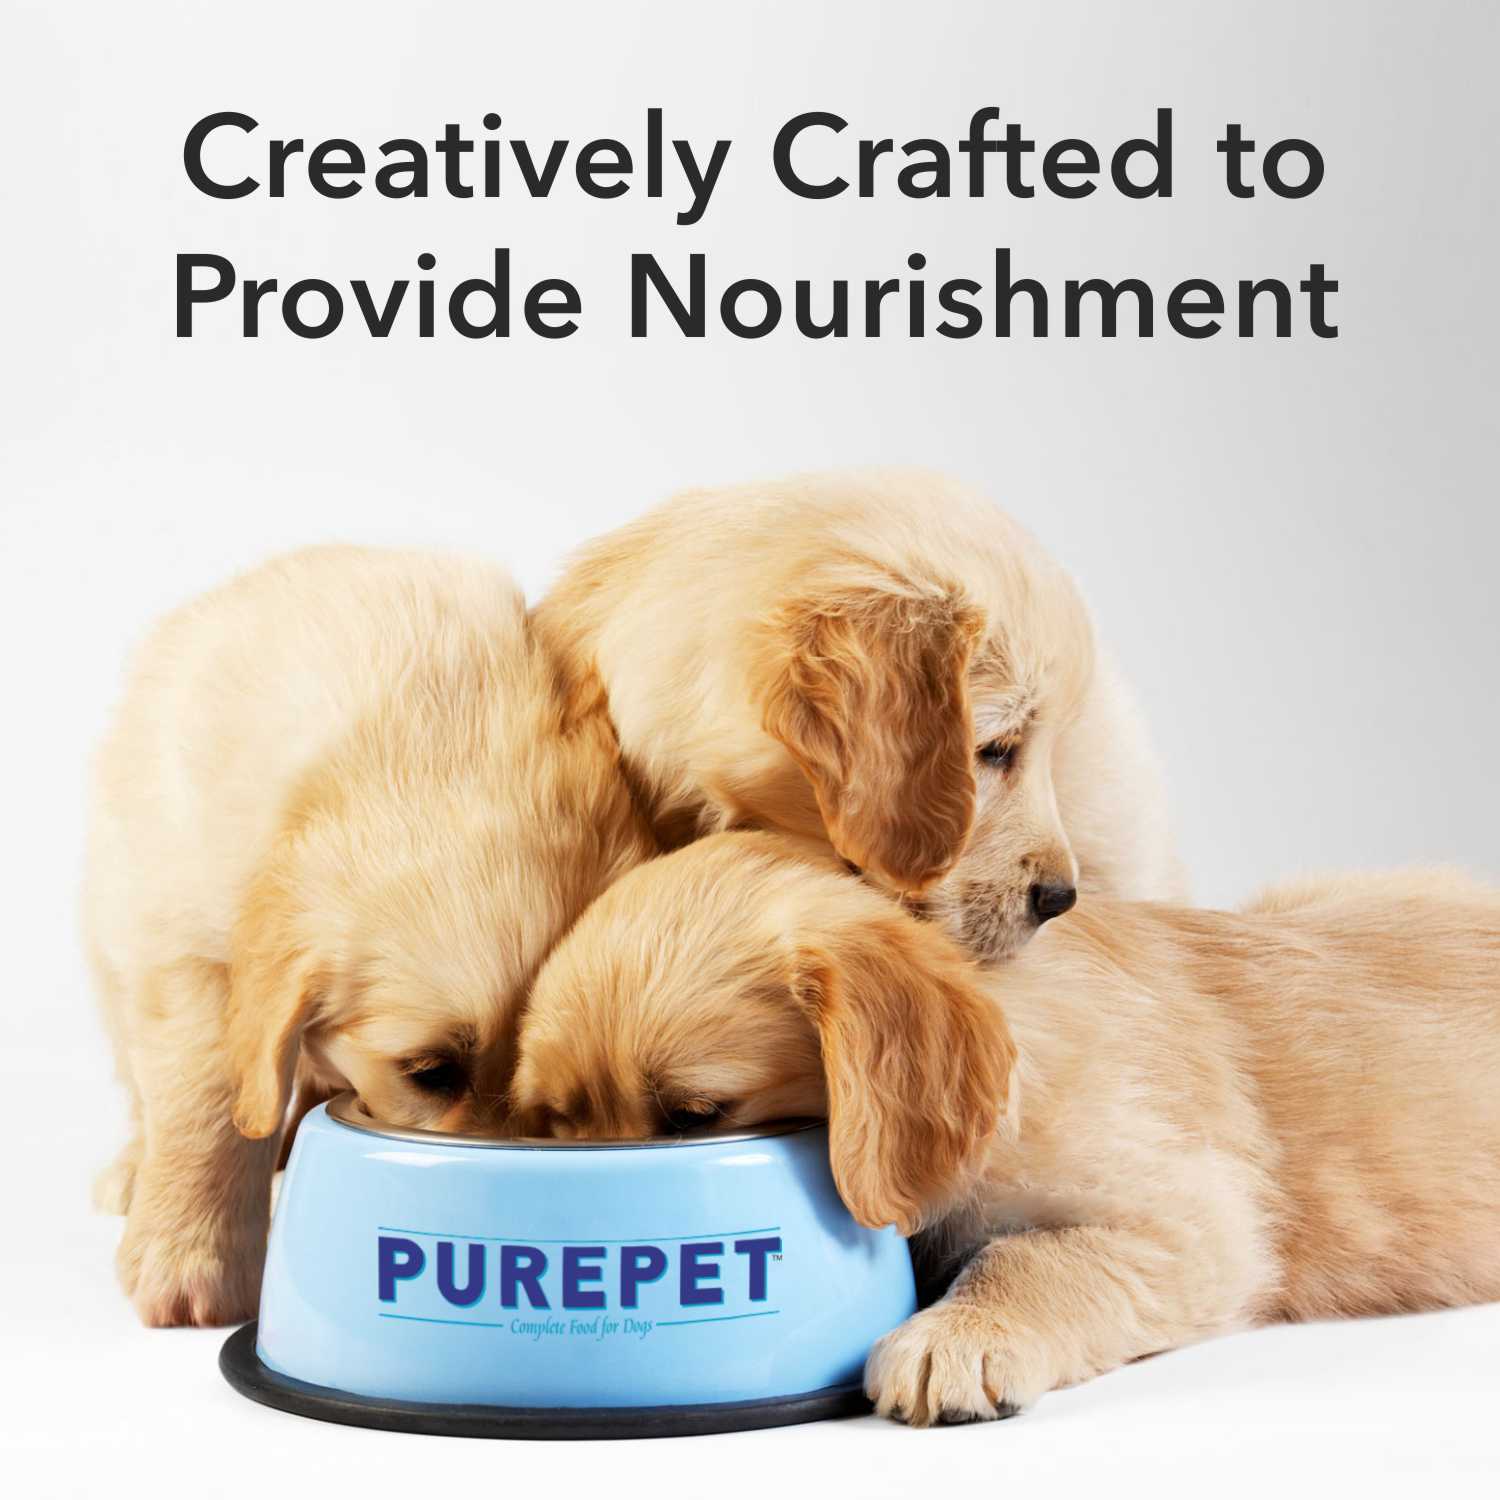 Purepet Chicken & Vegetable Adult Dog Dry and Wet Food Combo